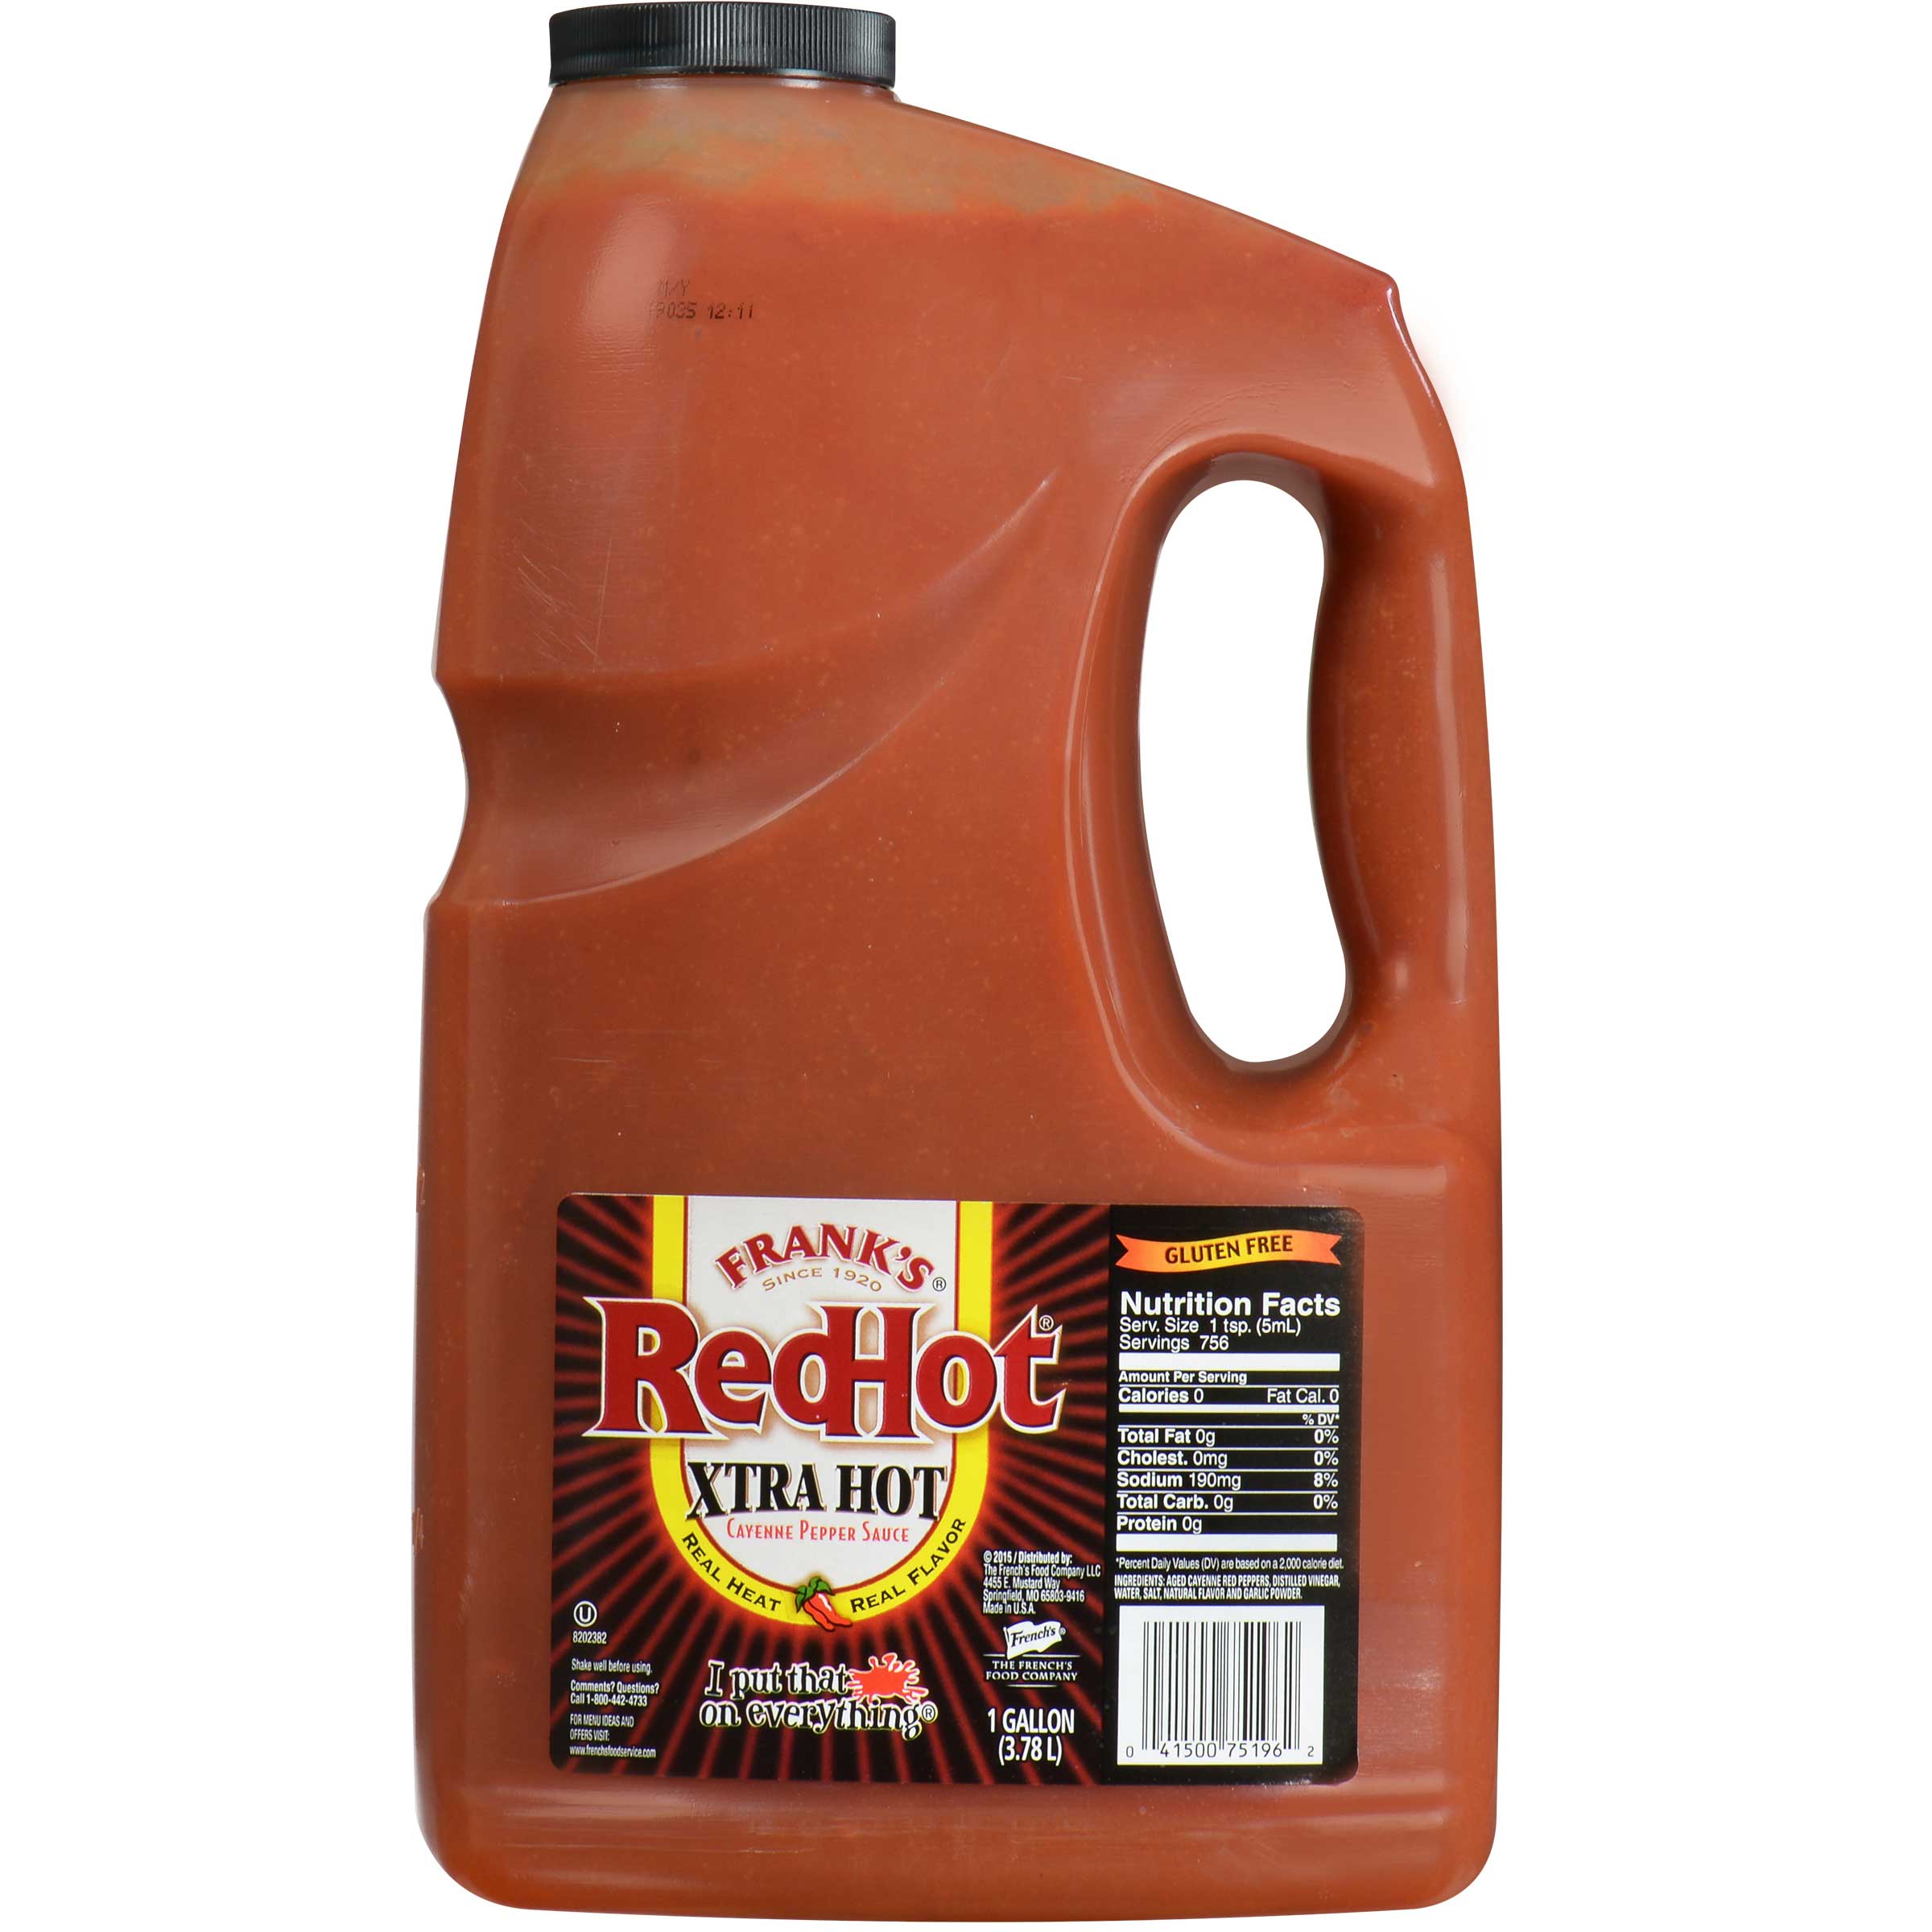 Sauce Franks Hotter Red Hot Plastic 4 Count 1 Gallon